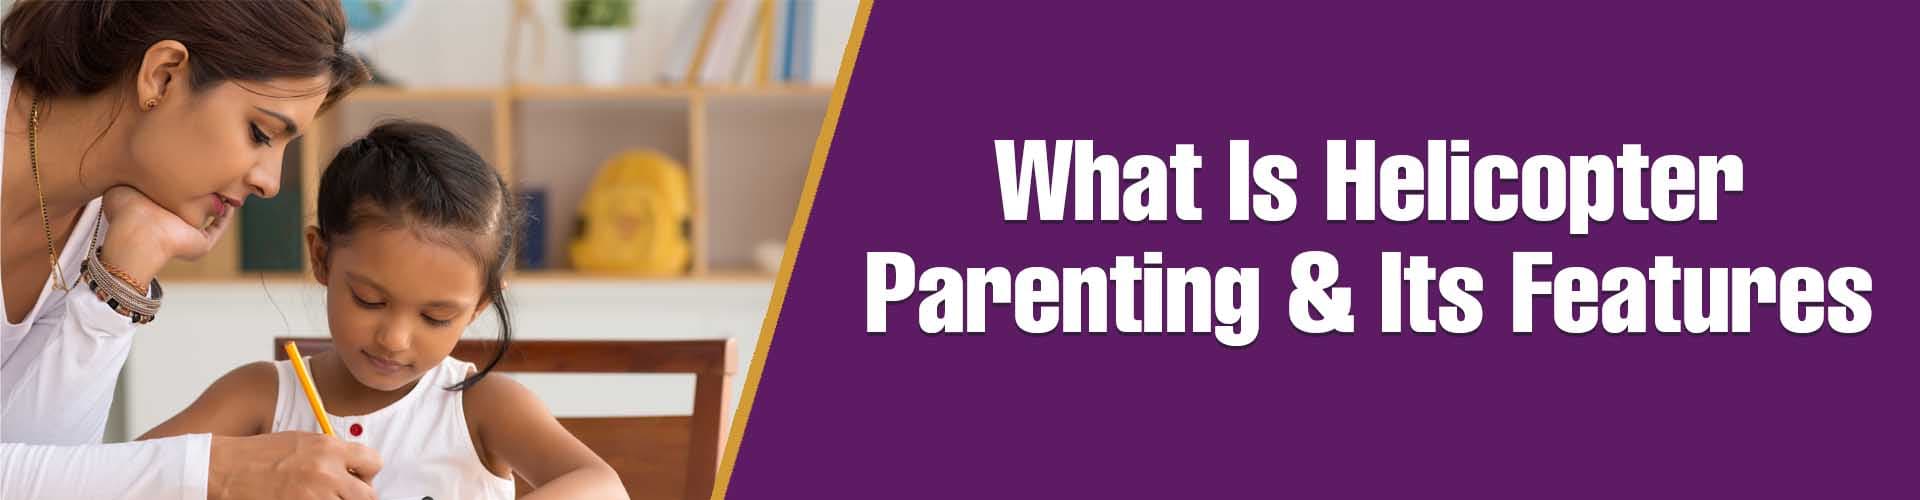 What is Helicopter Parenting?